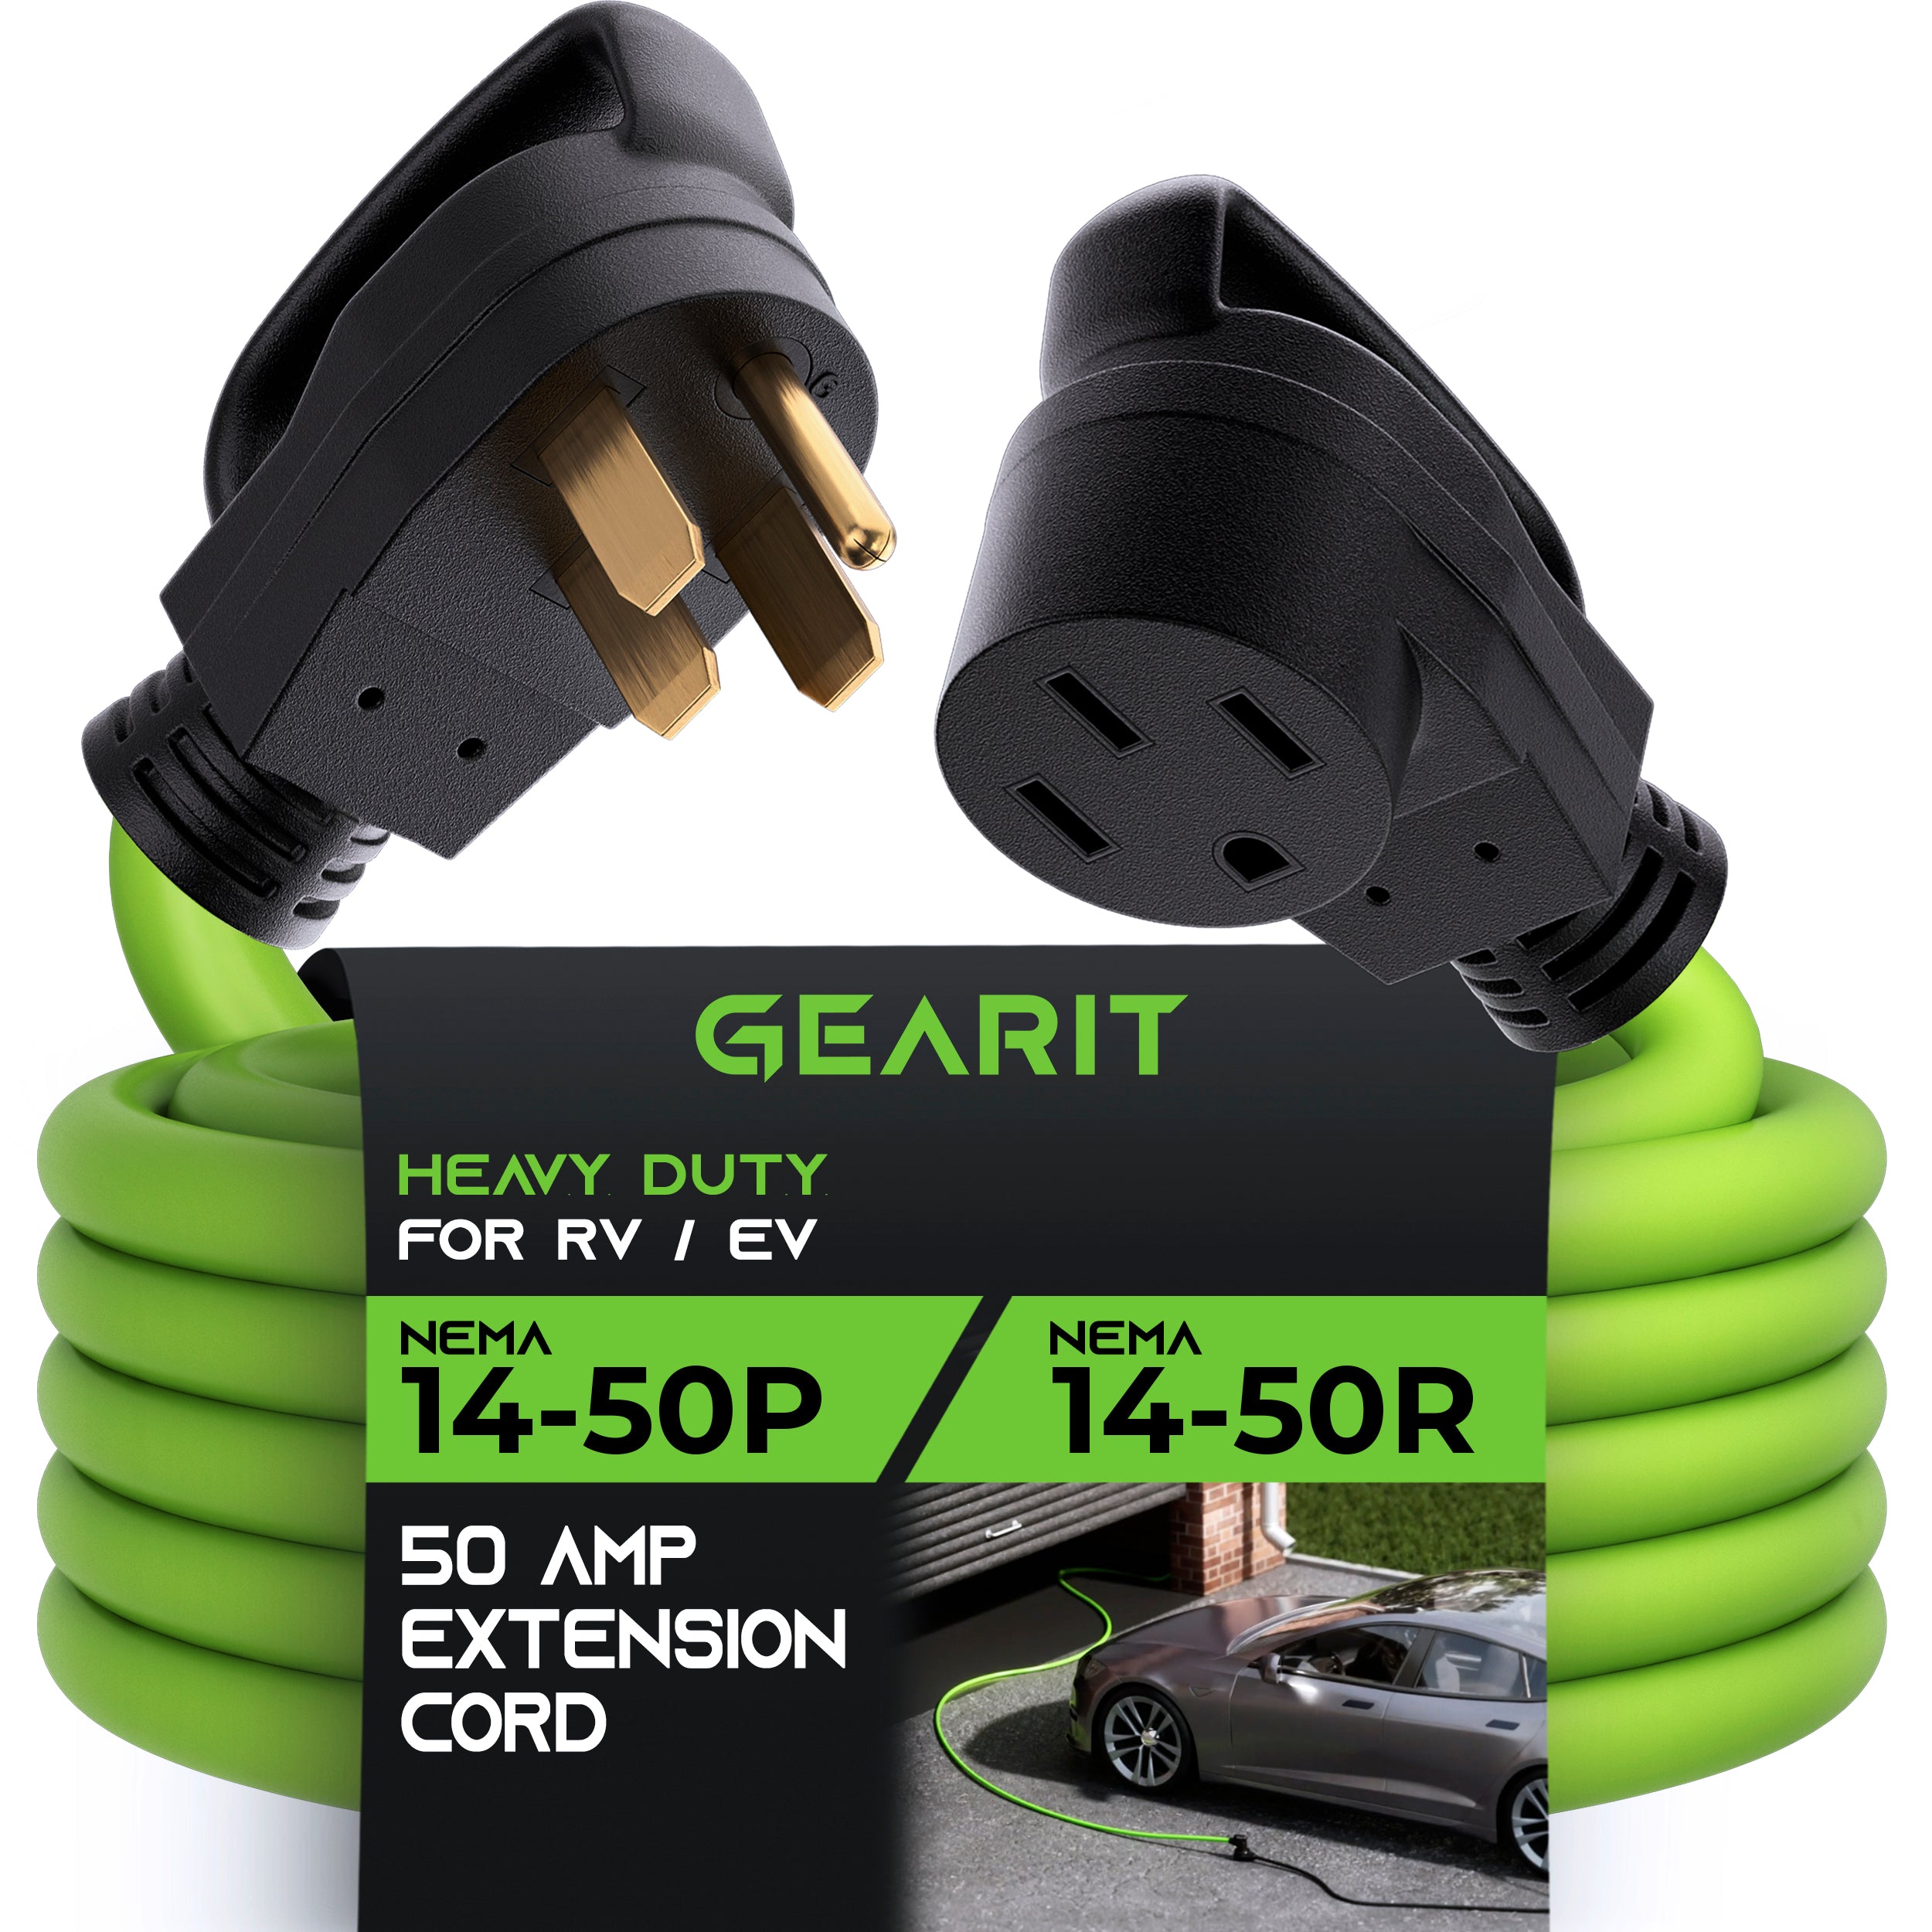 GearIT 50-Amp Extension Cord for RV and EV (15 ft) 4-Prong 250-Volt, Tesla Model 3/S/X/Y, NEMA 14-50P to 14-50R 6/3, 8/1 STW AWG